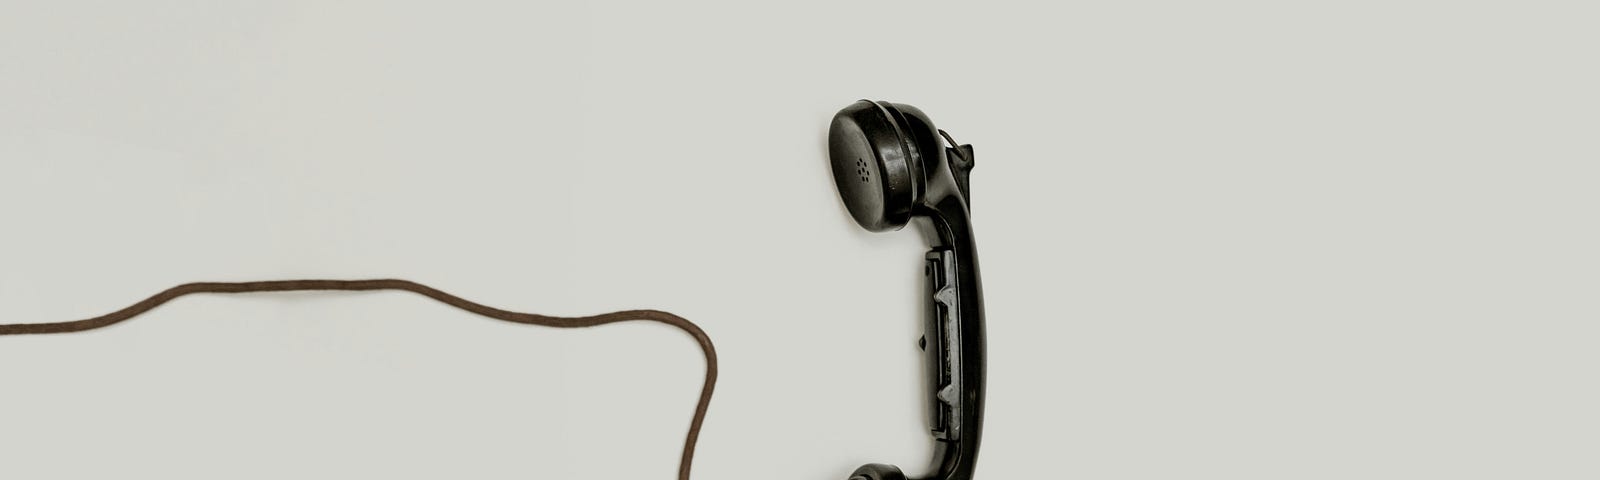 Old style black telephone receiver and cord